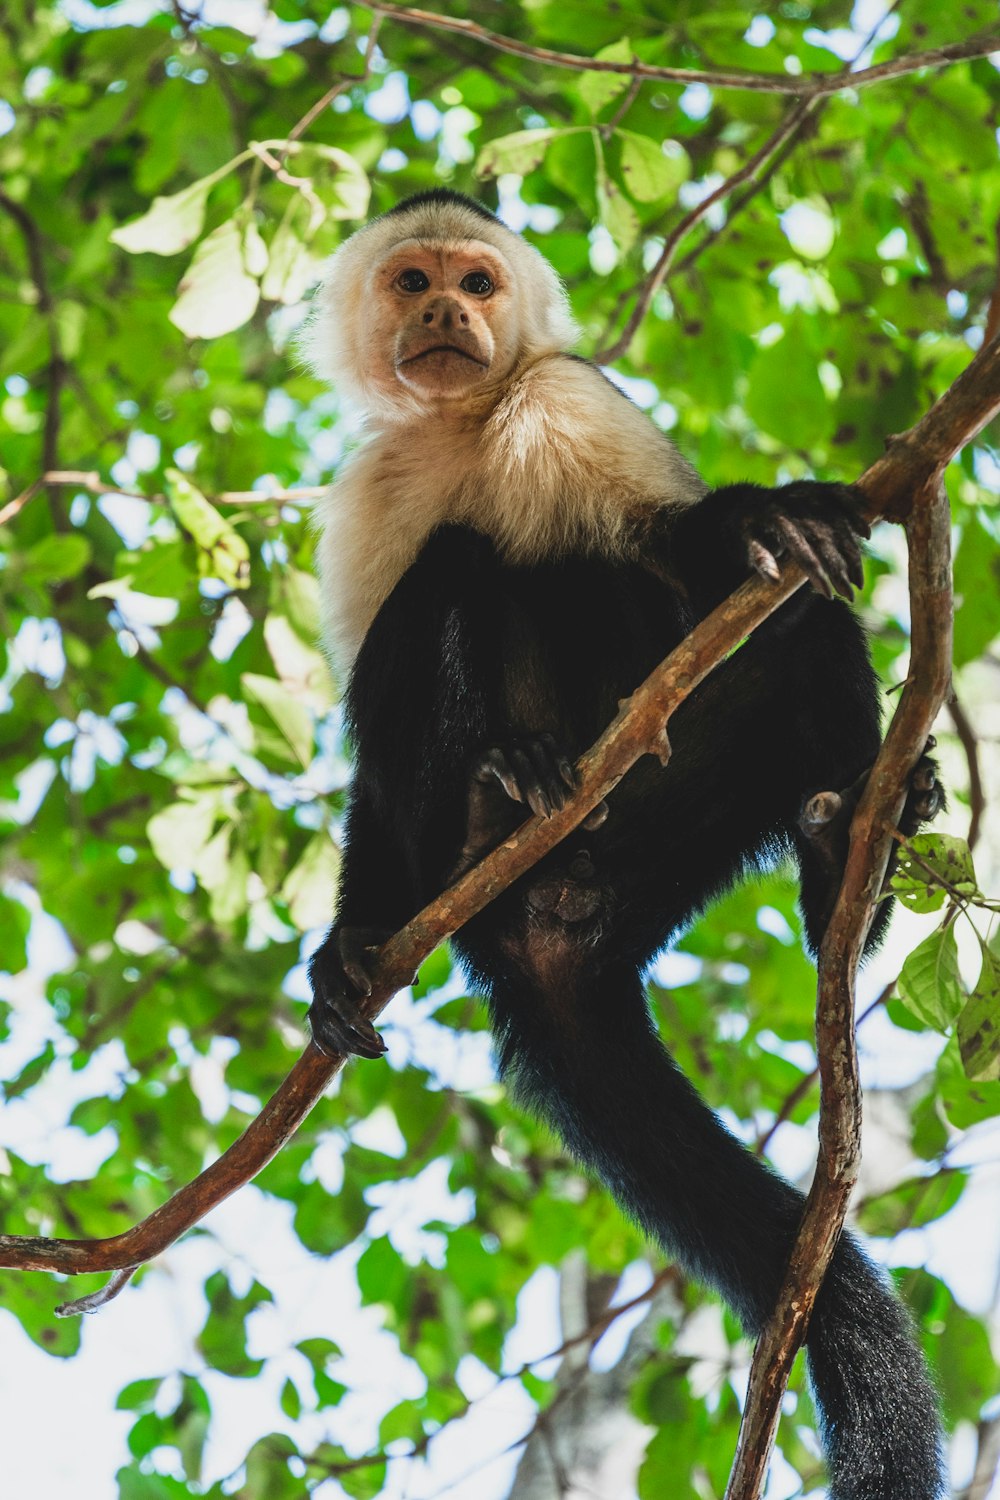 black and white monkey on tree branch during daytime